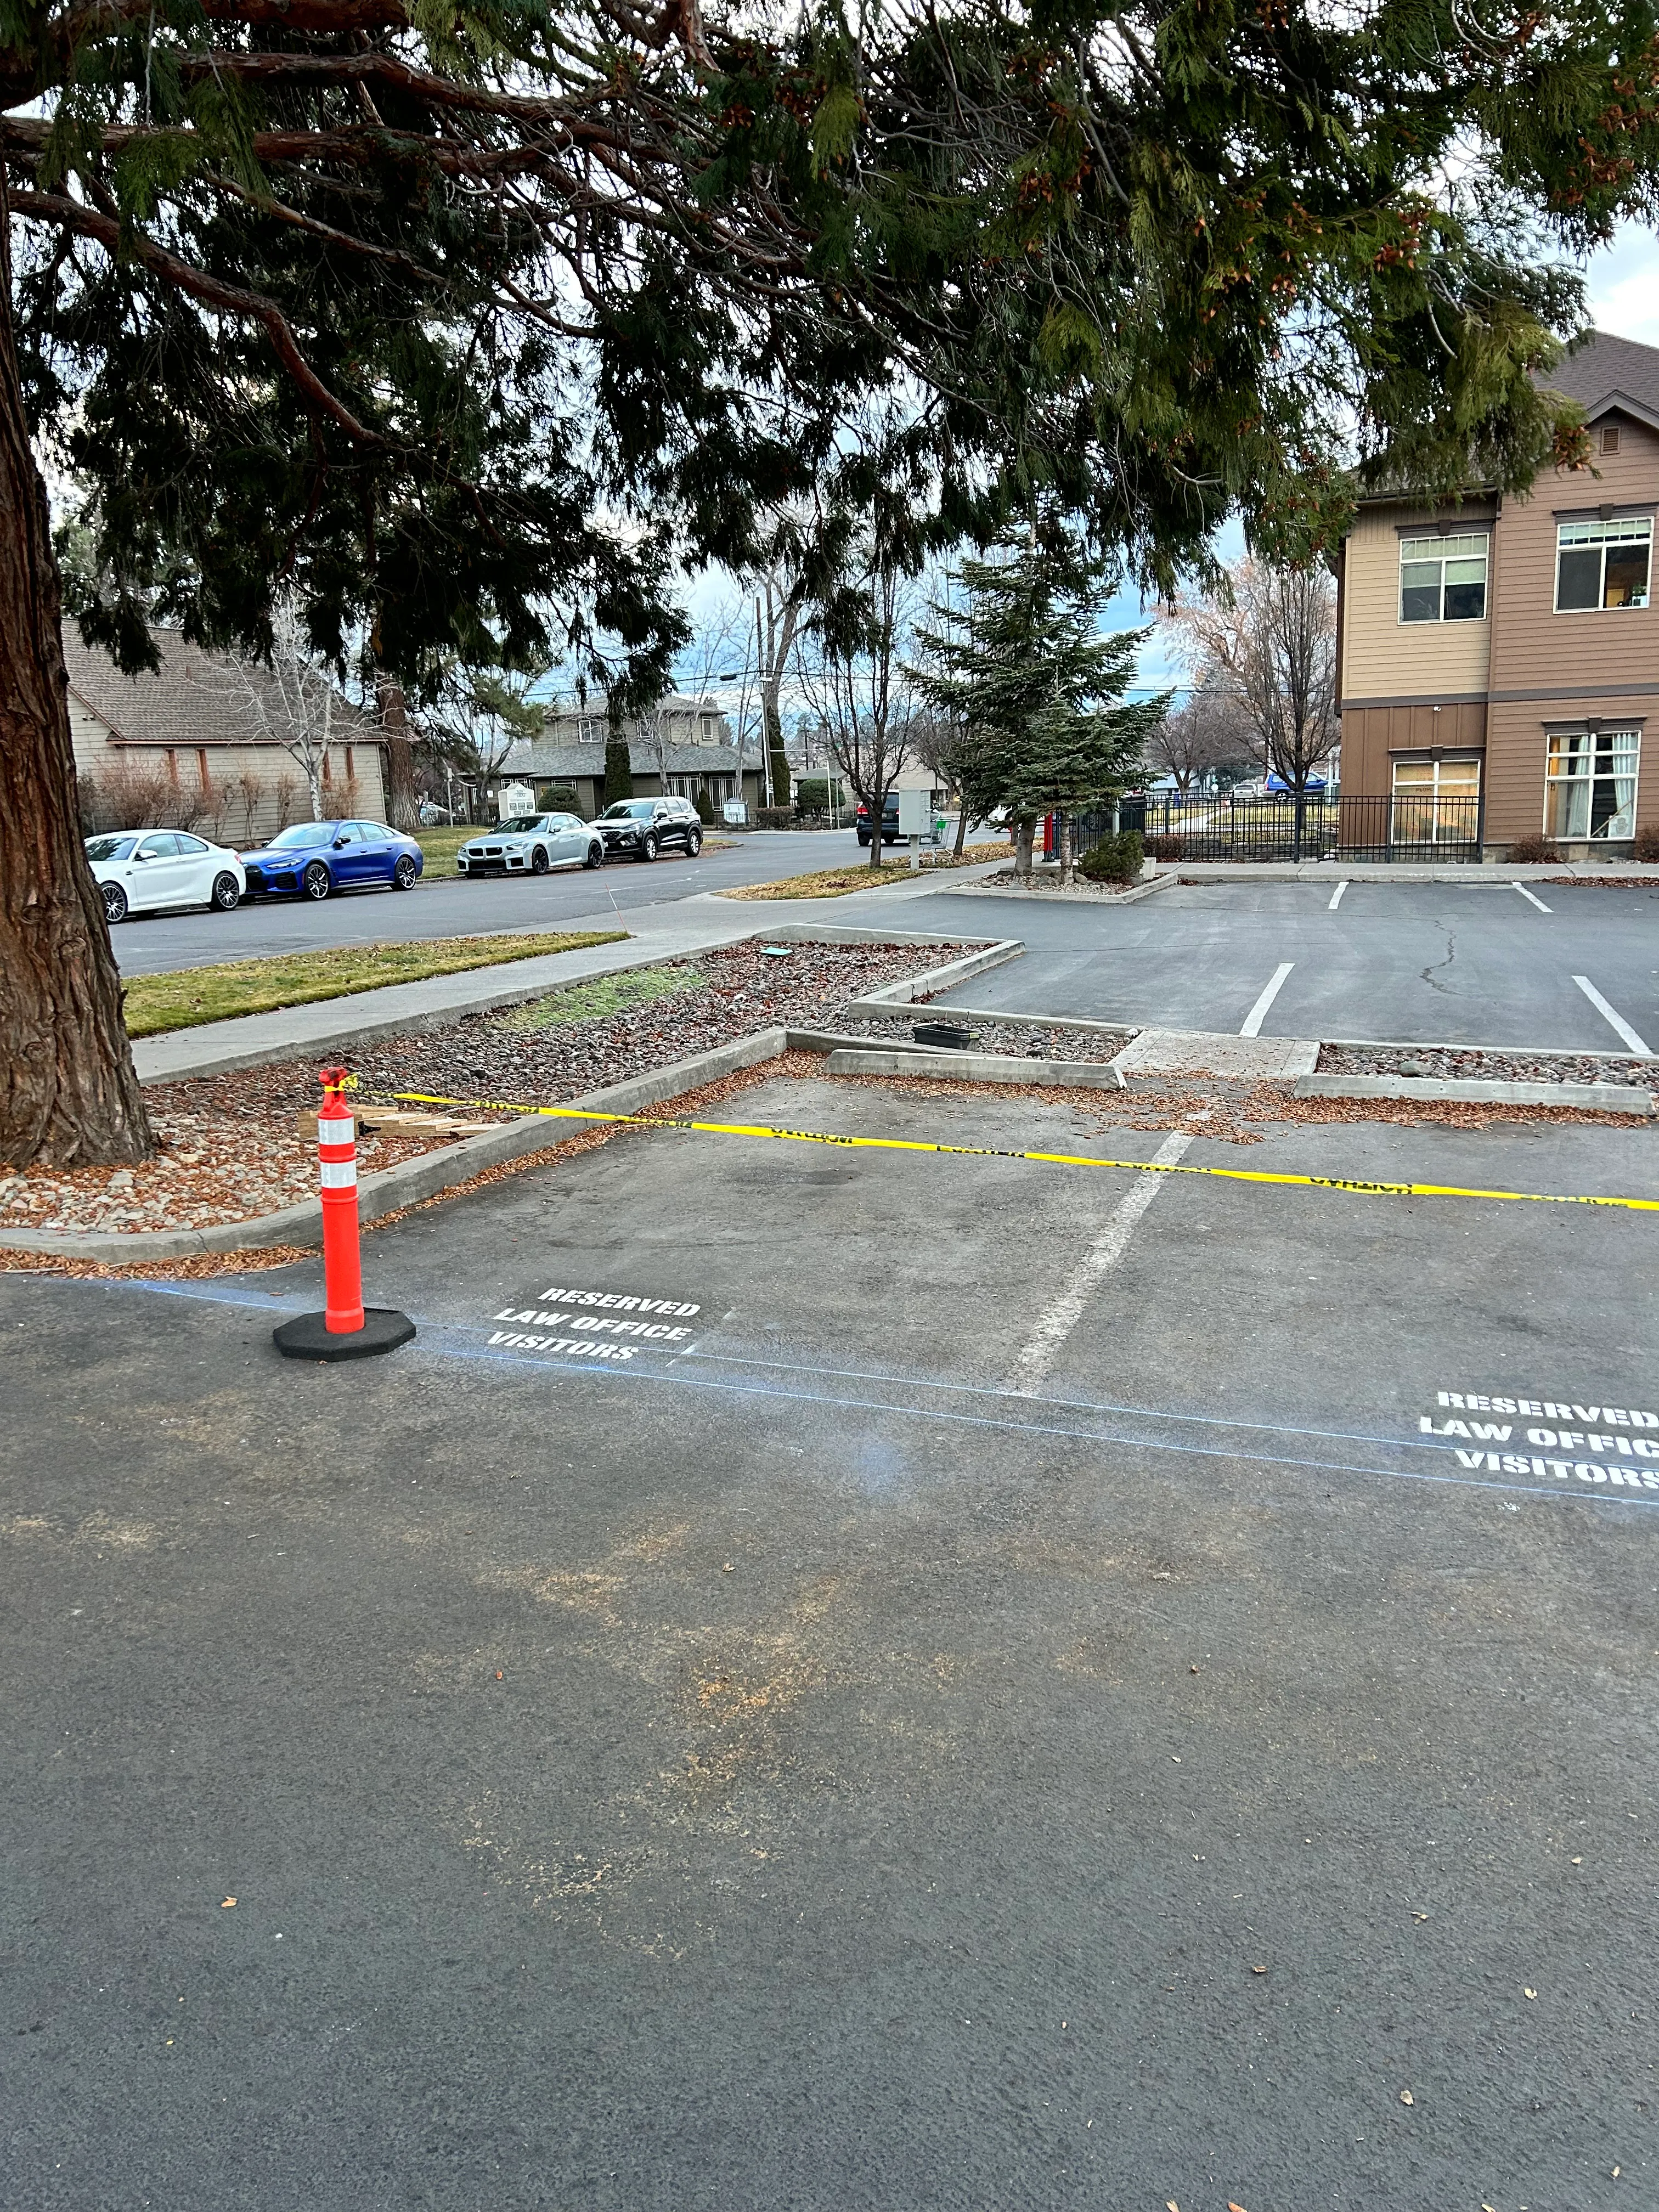 Parking Lot Sealcoating for Pacific Sealcoating in Bend, OR